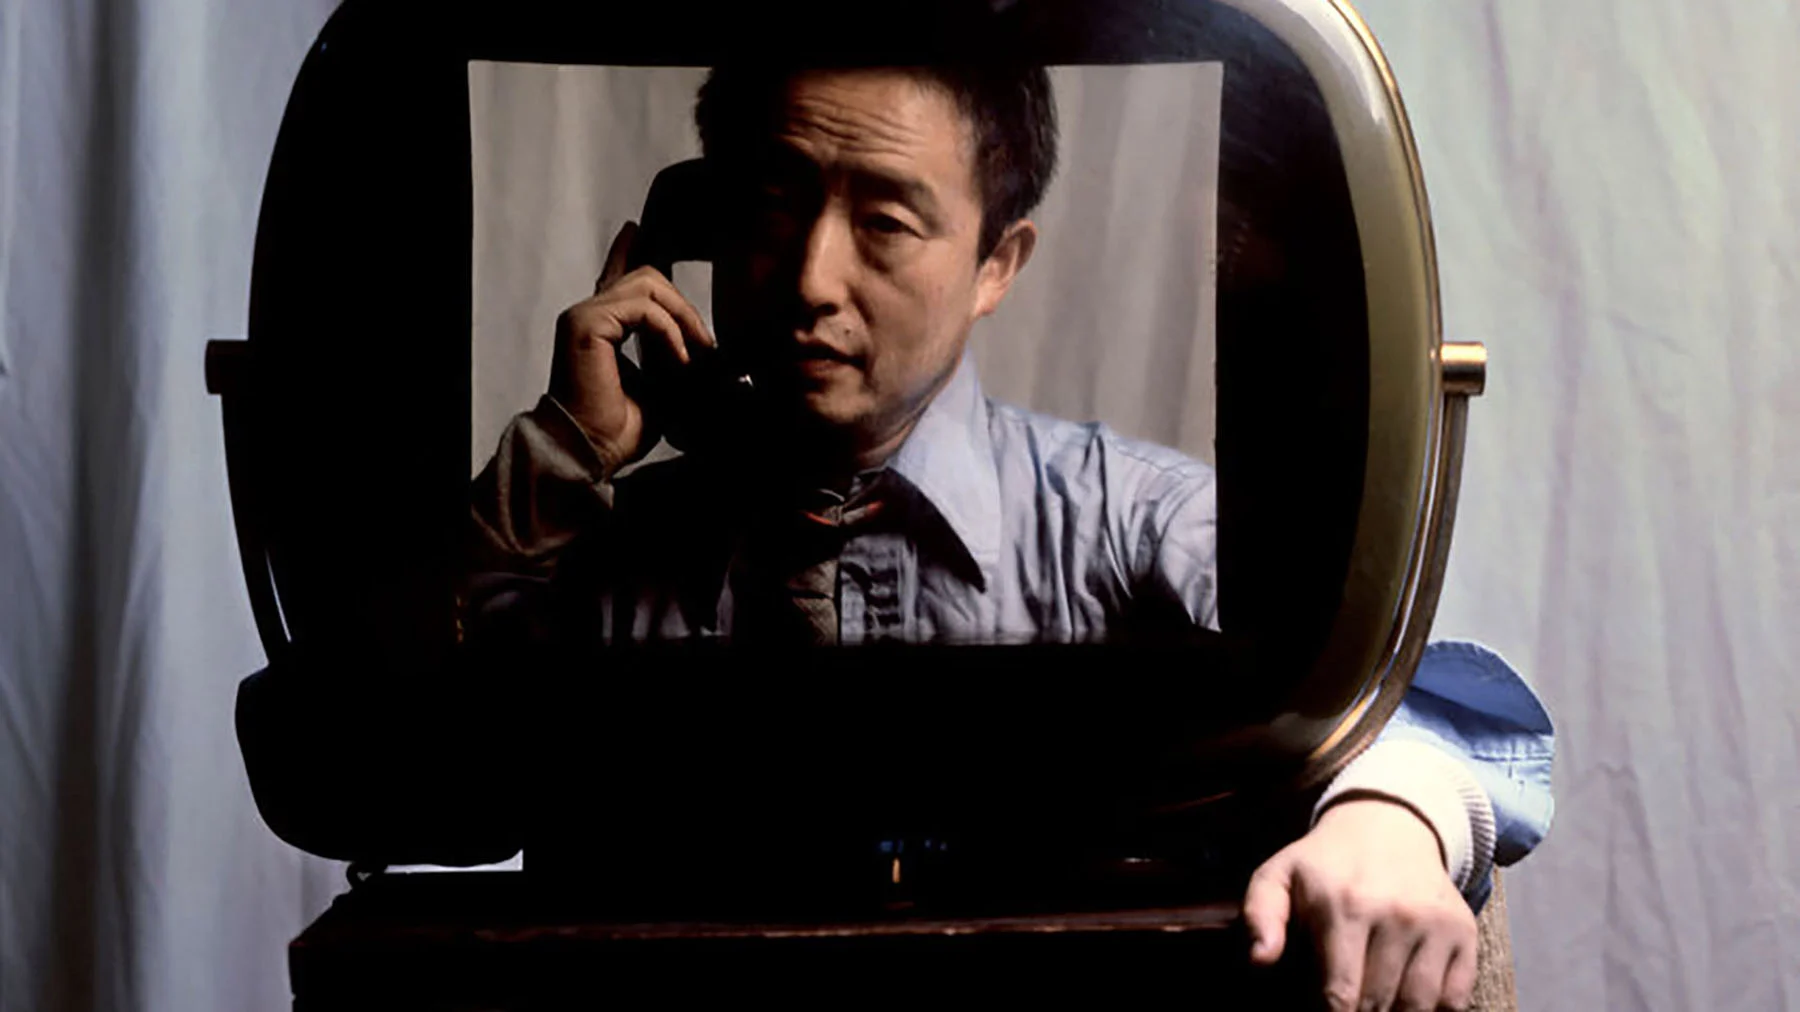 The artist Nam June Paik, an East Asian man with dark hair and wearing a blue shirt and a gray tie, is pictured on a television screen placed on a table against a blue-gray fabric backdrop. He is framed from the chest up with his face half in shadow, and he holds a telephone receiver to his right ear. The left arm of an otherwise hidden person standing behind the television screen, wearing the same blue shirt, is lined up with the on-screen image, making it appear the artist is both inside and outside of the television set.